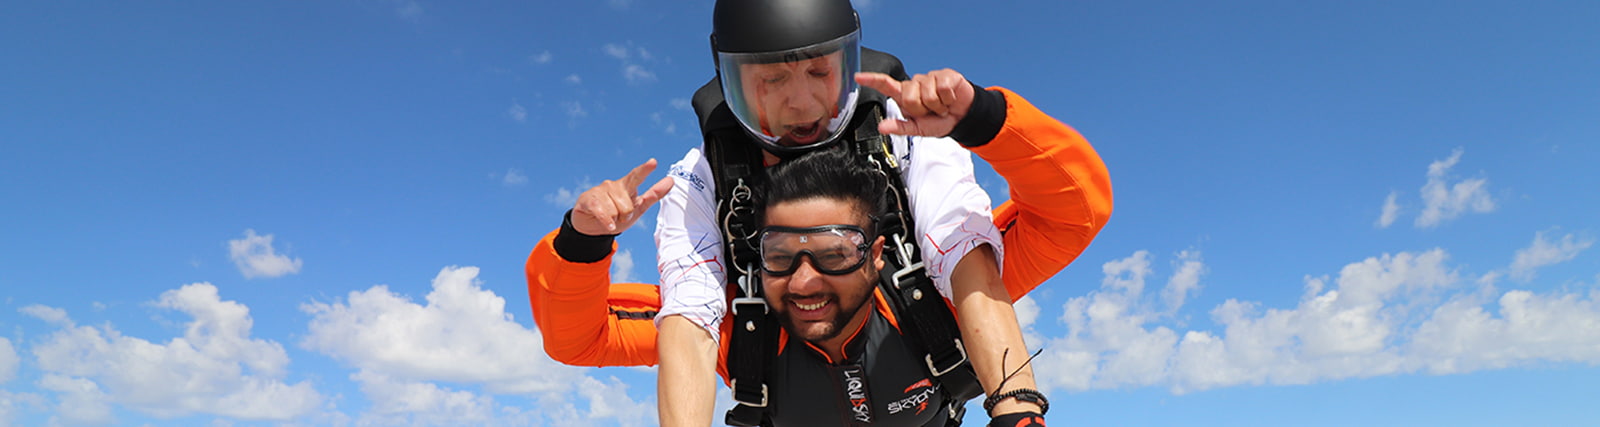 sky-dive-front-img